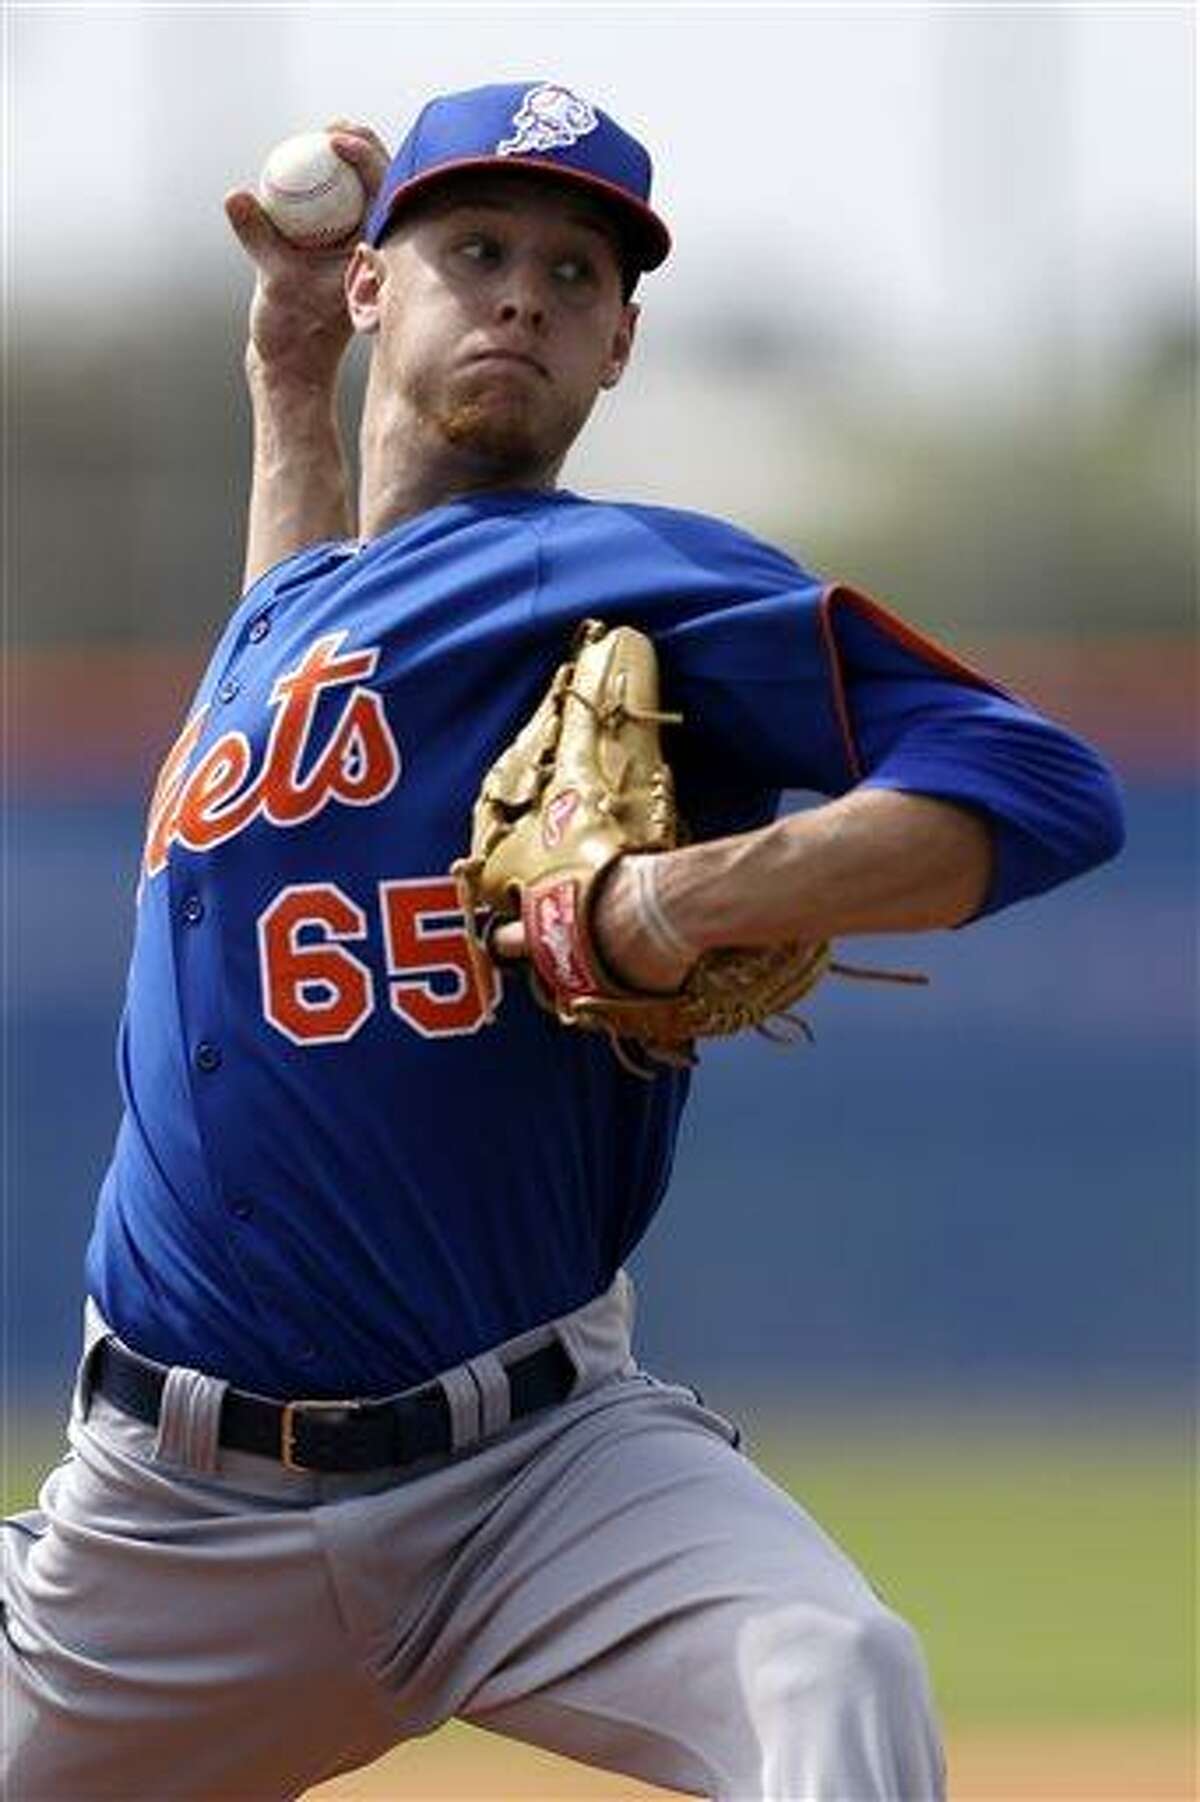 Zack Wheeler: Scouting Report on NY Mets' Newest No. 1 Prospect